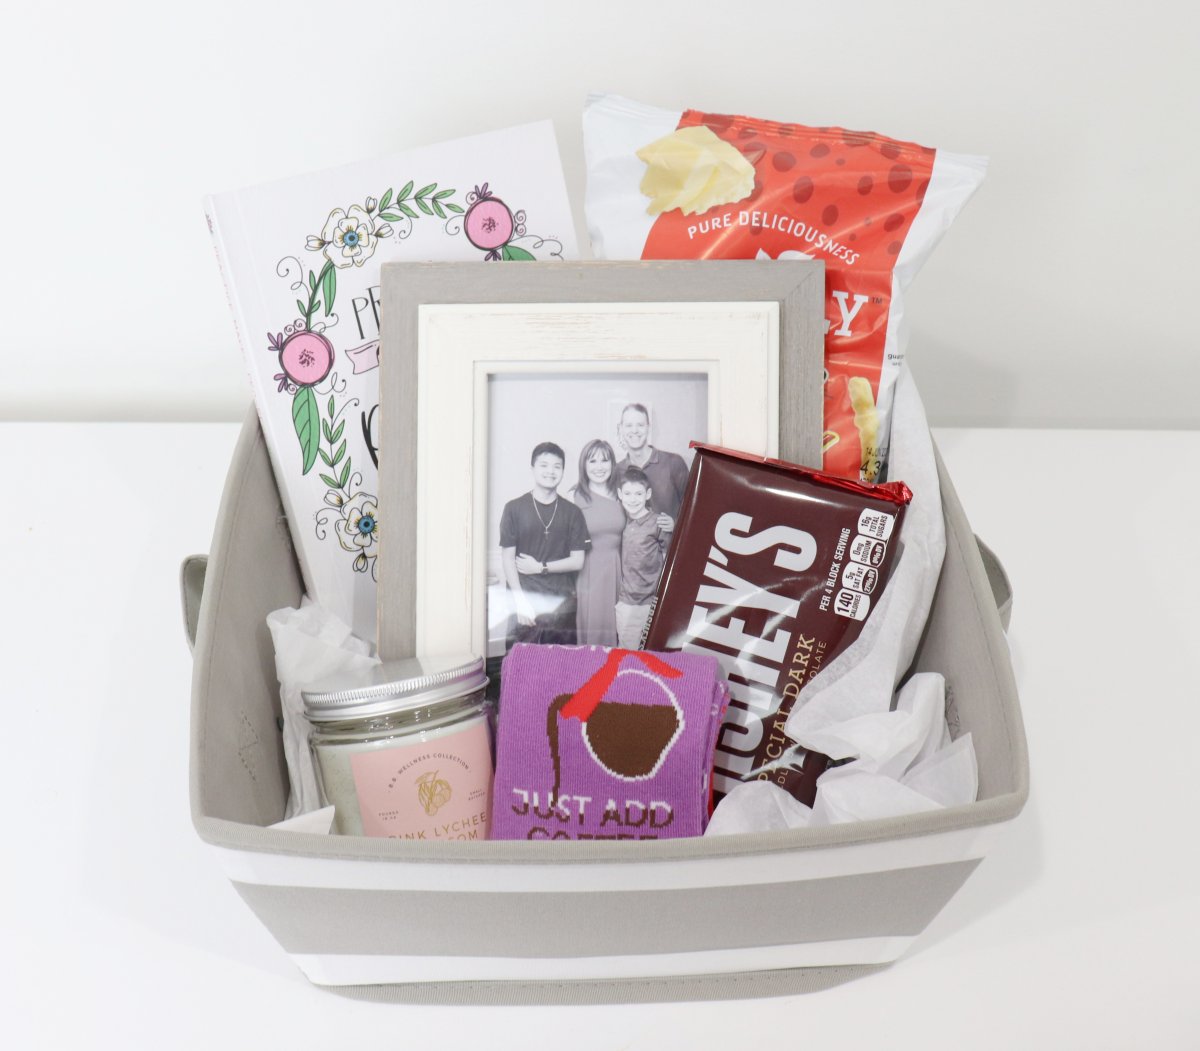 Image contains a grey and white striped basket holding a journal, a bag of cheese curls, a framed black and white photo of Amy's family, a special dark Hershey bar, a jar candle, and a pair of purple socks, on a white background.